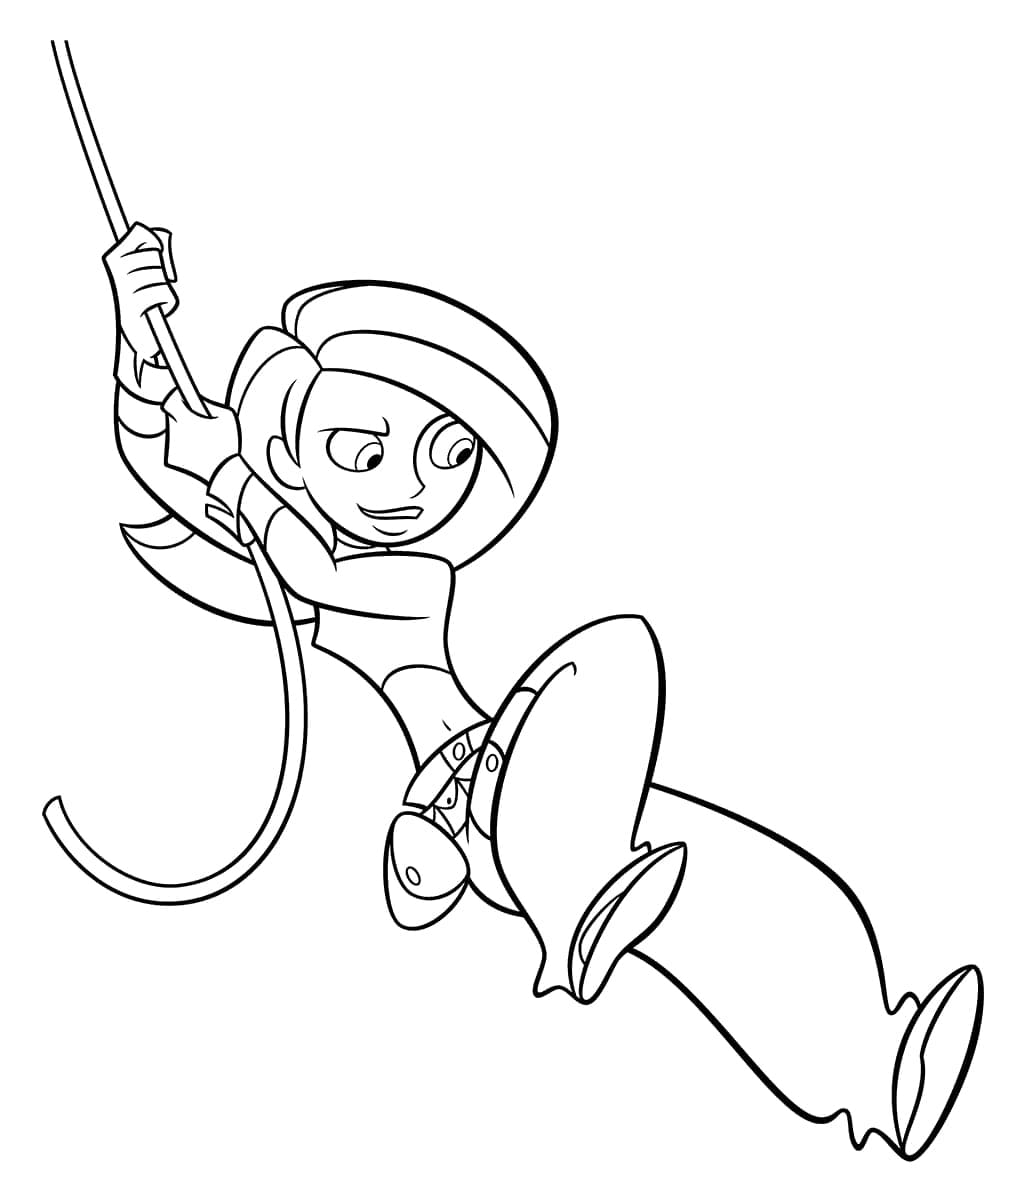 Amazing Kim Possible coloring page - Download, Print or Color Online ...